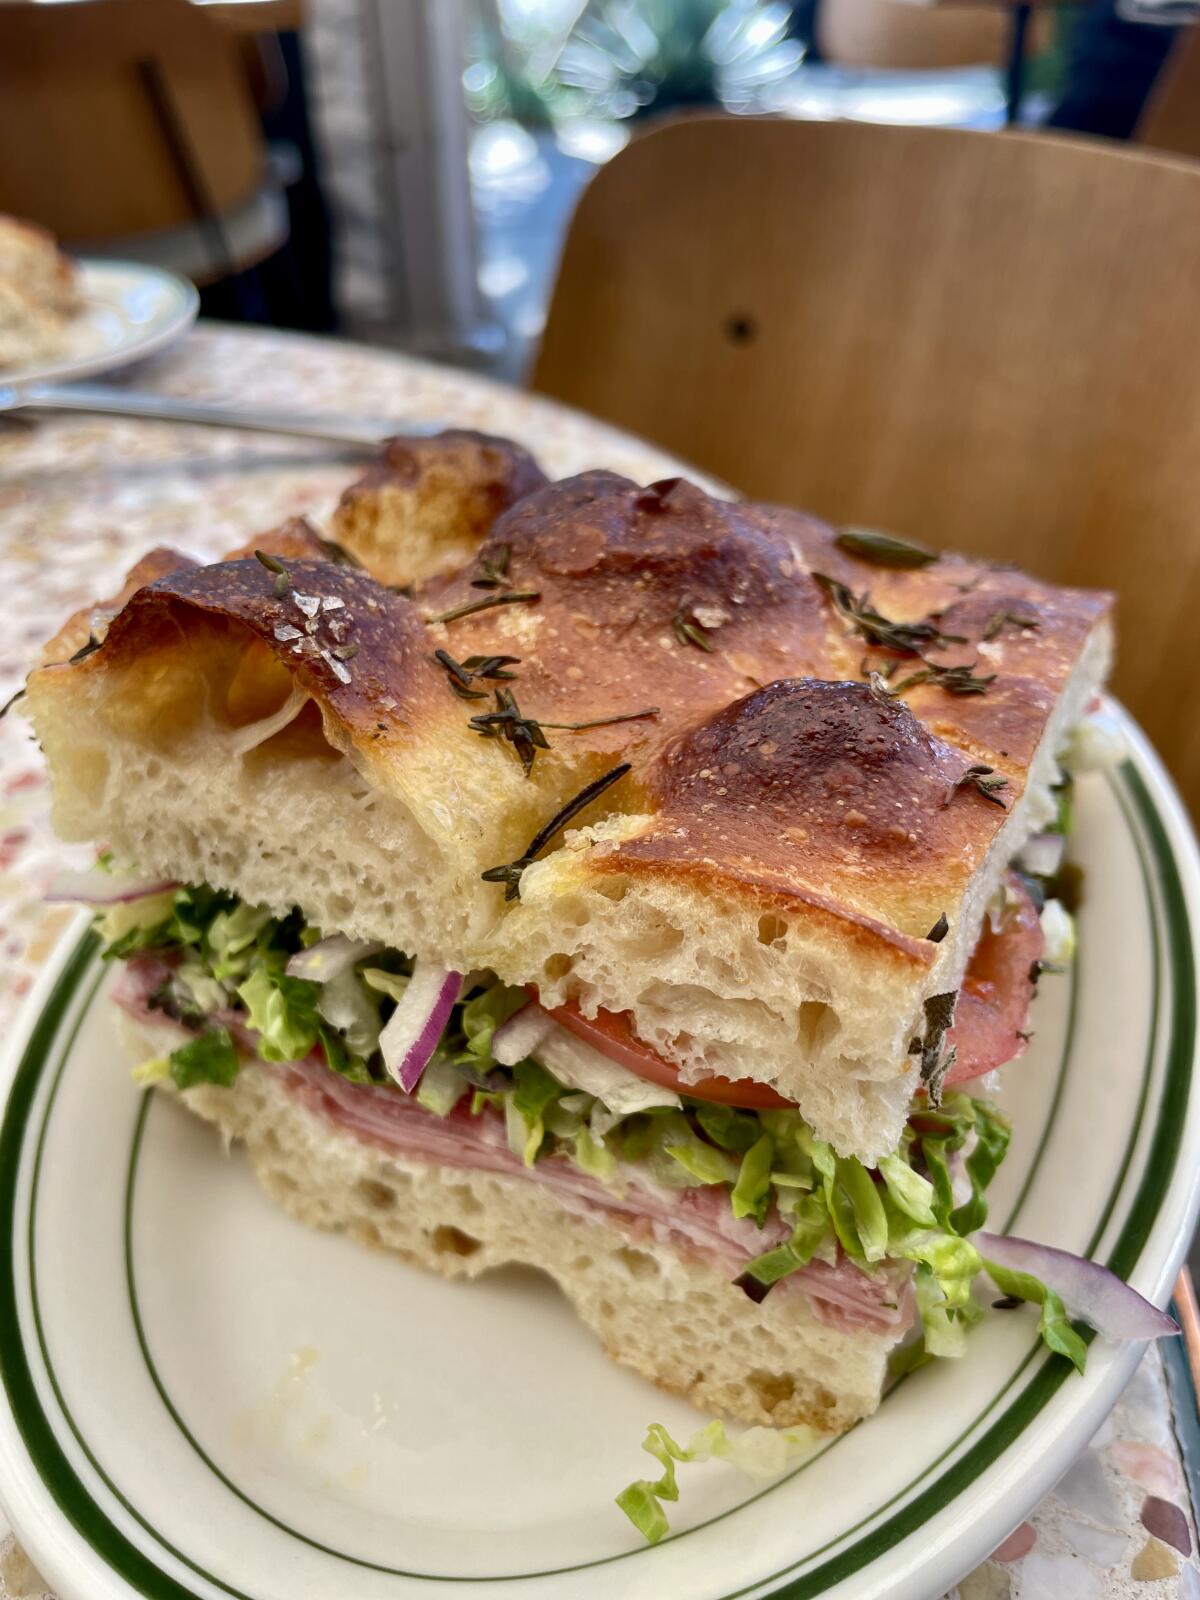 The Sasto sandwich from Saffy's Coffee & Tea Shop in East Hollywood.